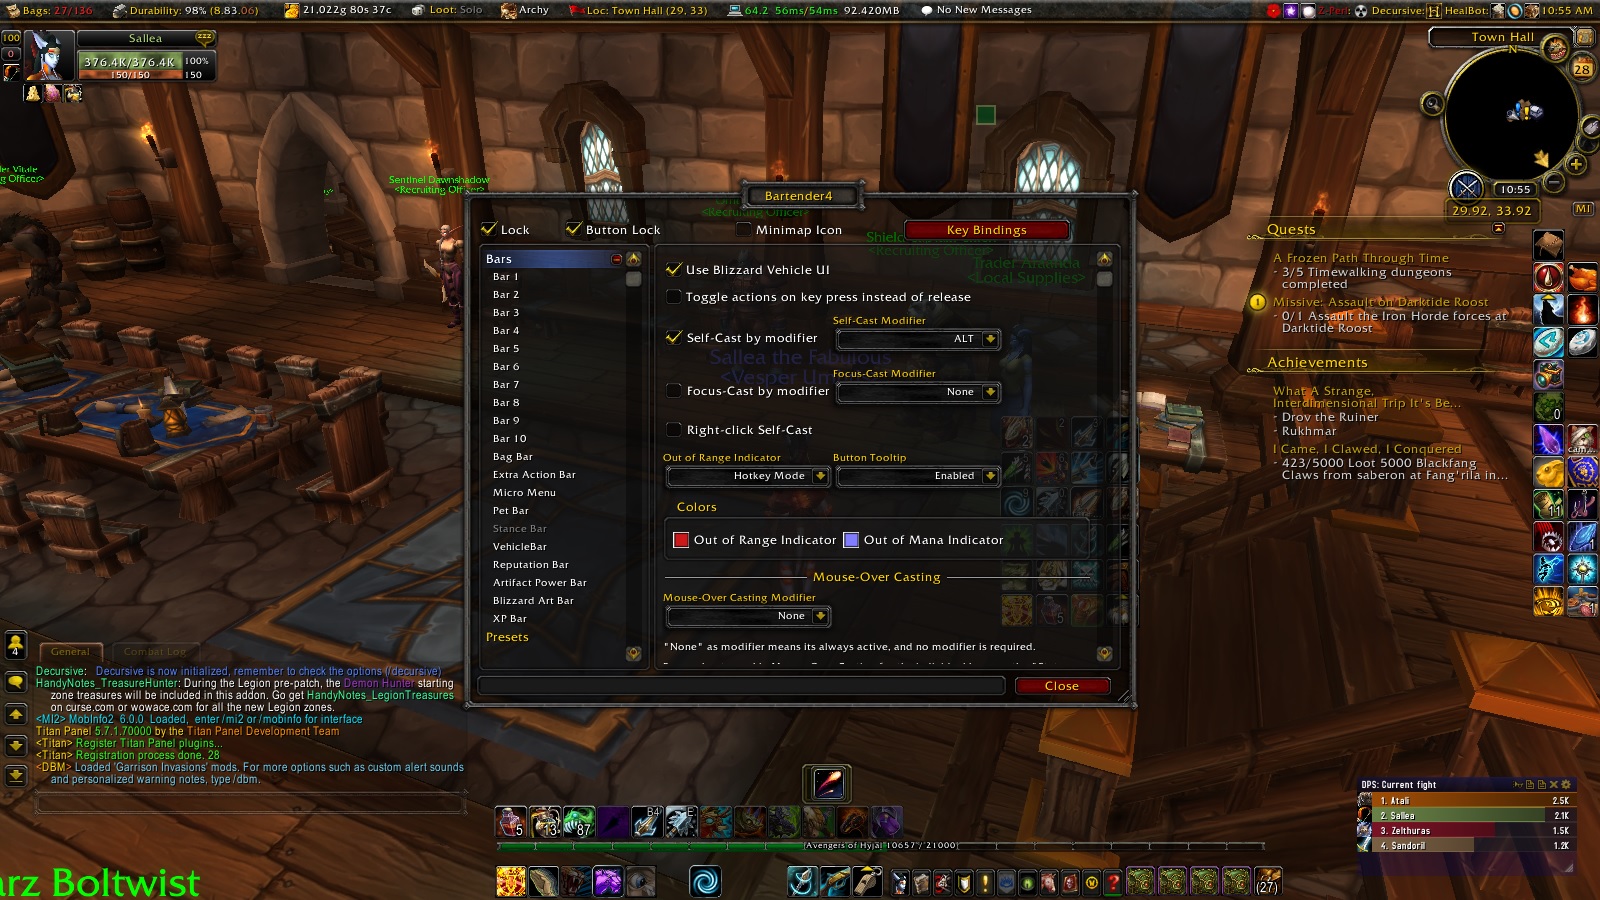 bartender 4 disappeared from addons